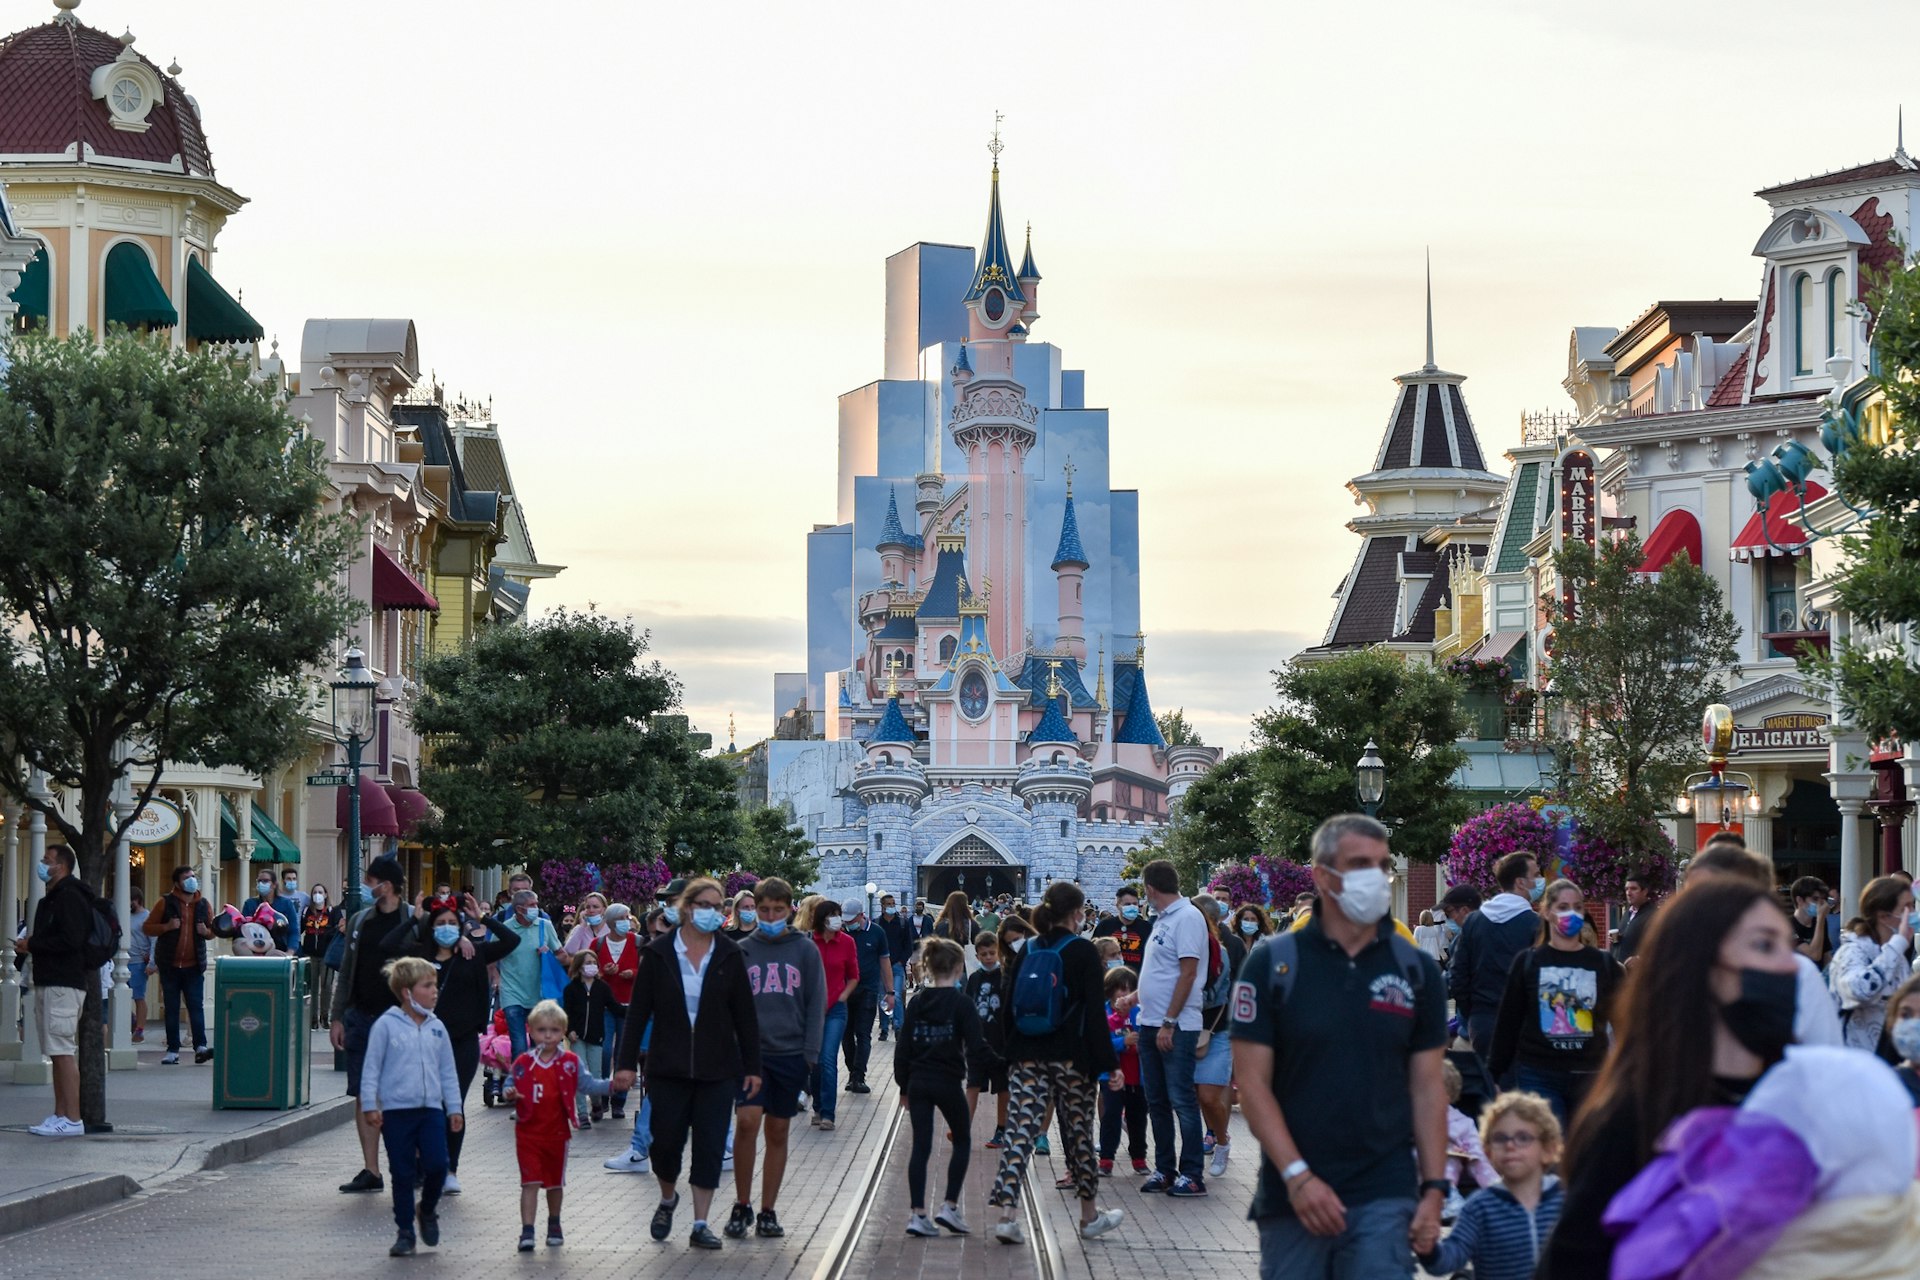 Tourists on Main Street in Disneyland Paris, with a pale pink fairy-tale castle rising above them in the distance